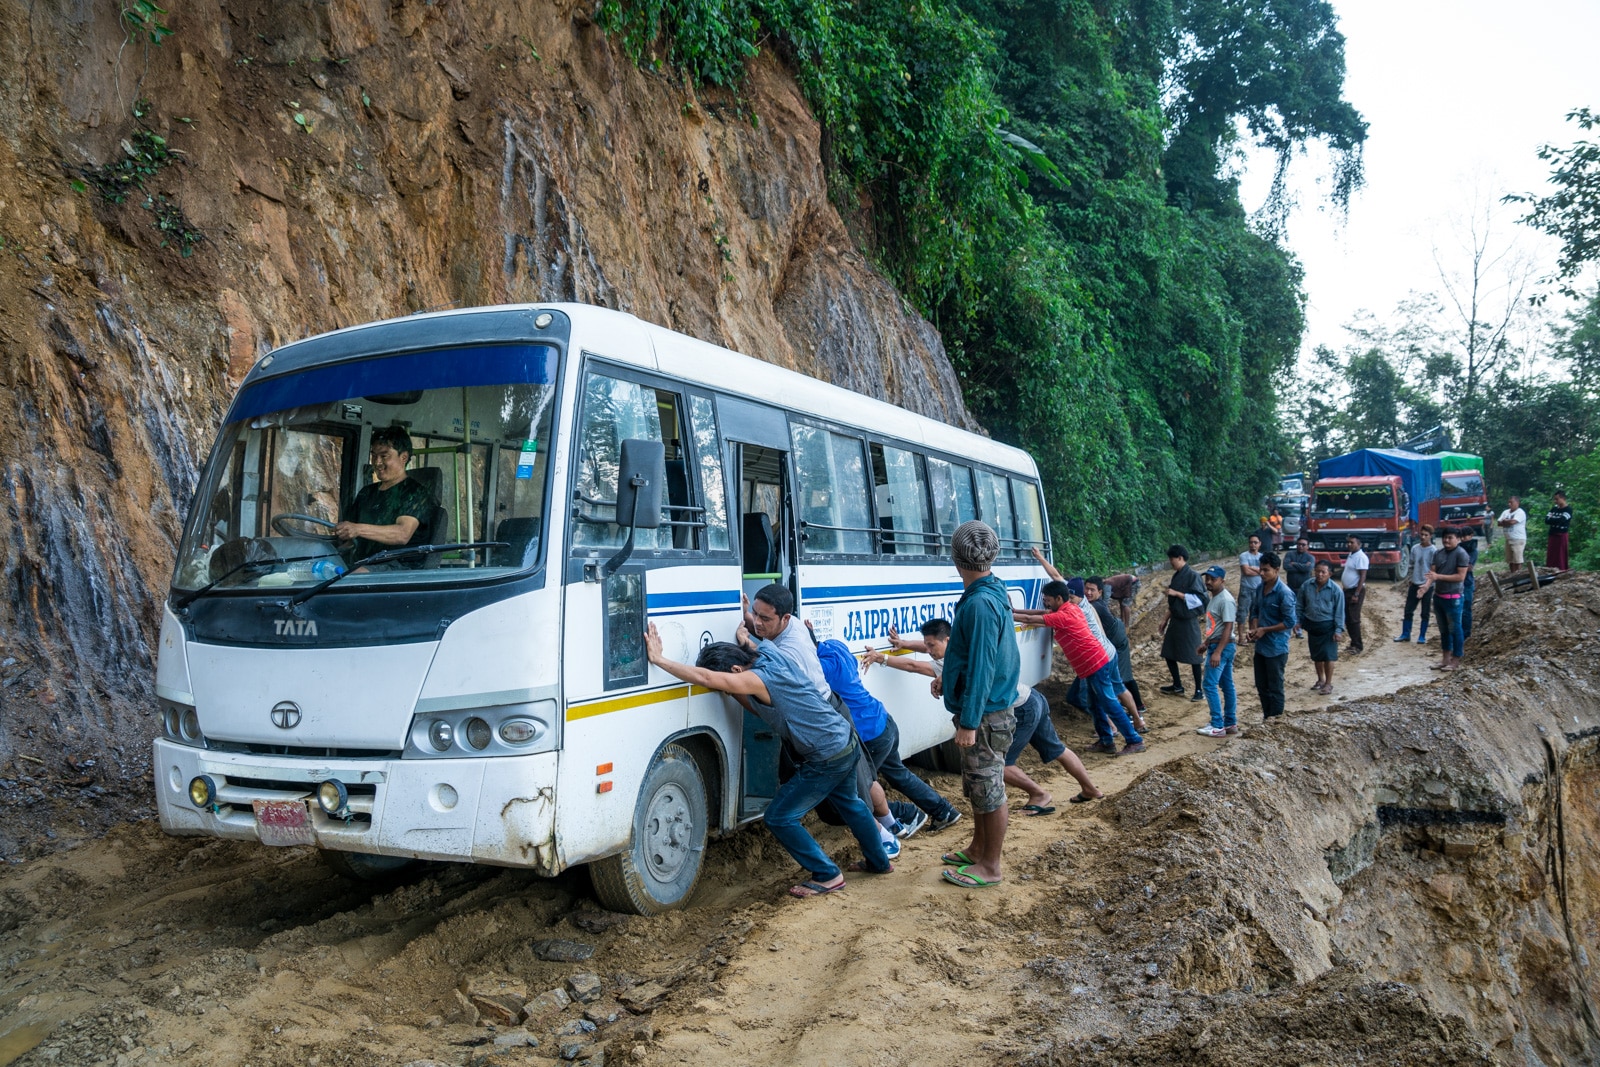 Off the beaten track Bhutan - Bus stuck in the mud - Lost With Purpose travel blog